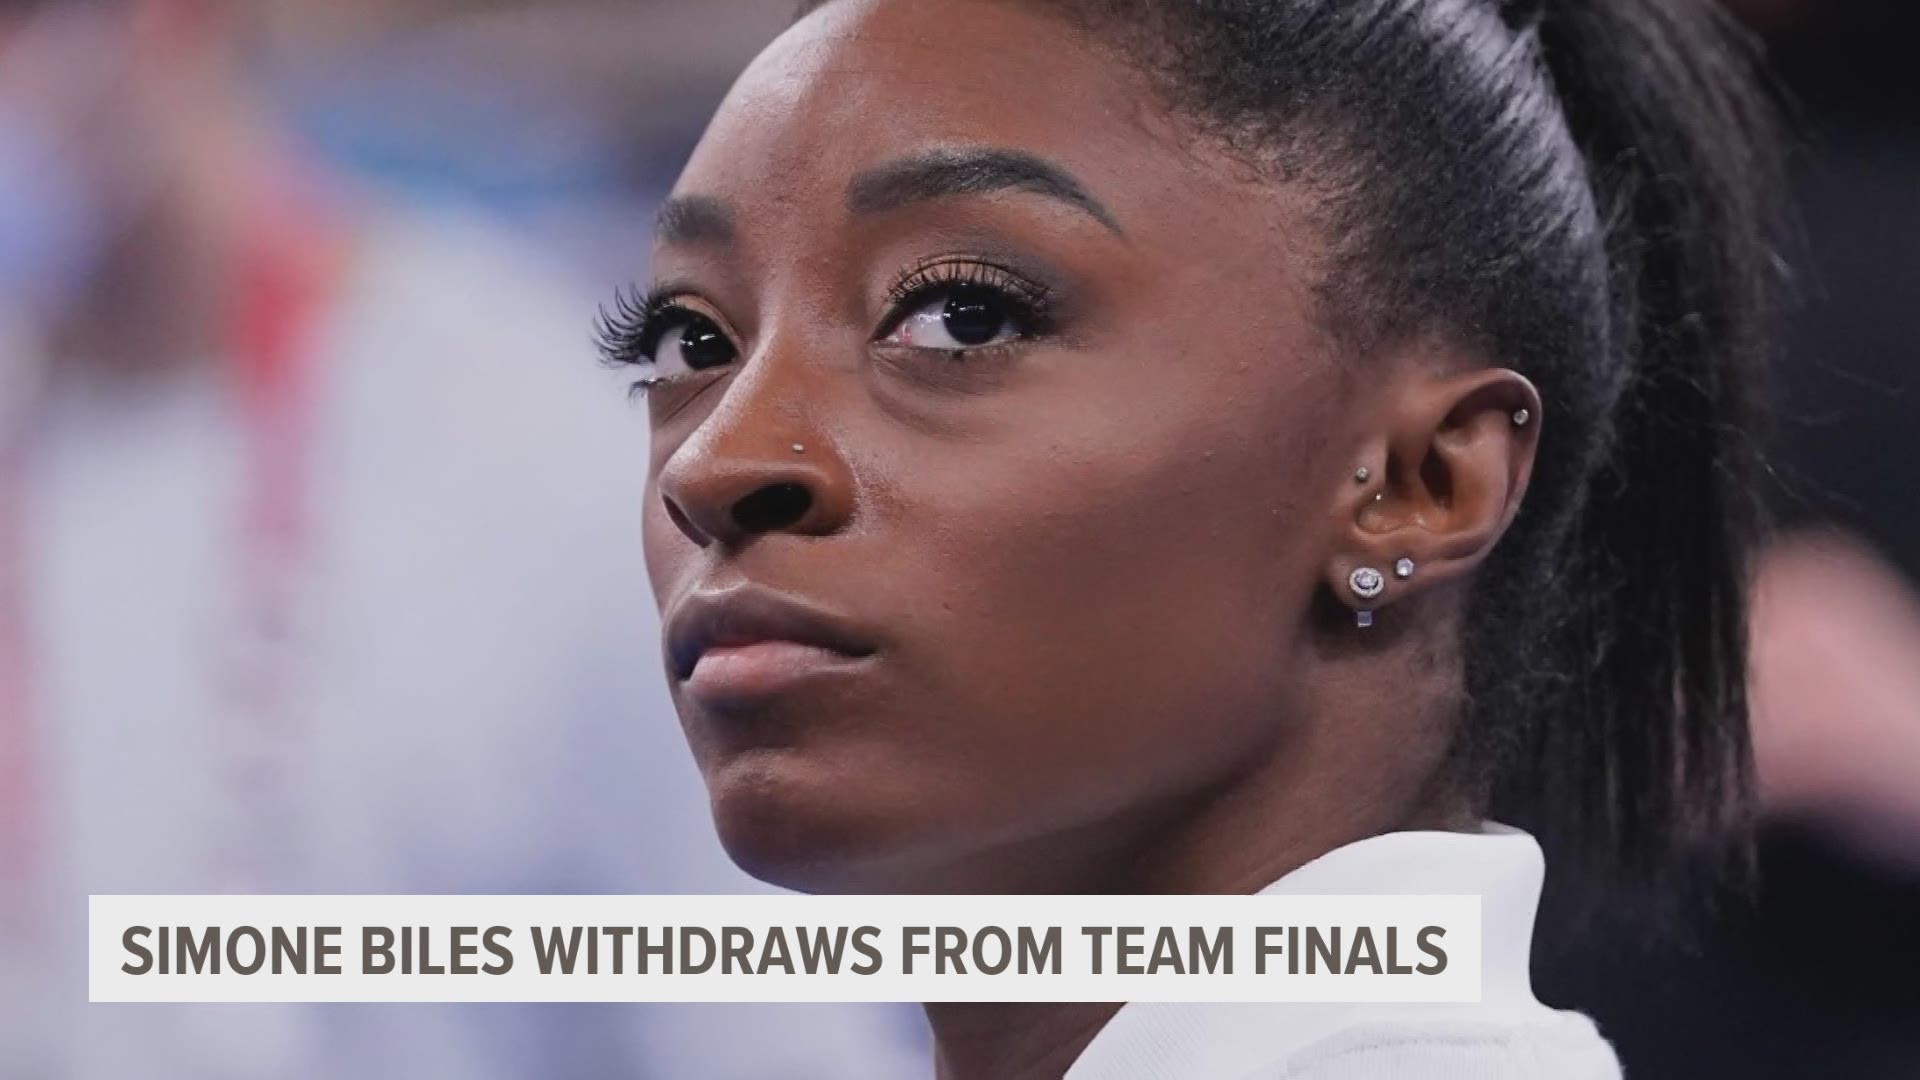 Biles spent the final three rotations serving as head cheerleader while Grace McCallum, Sunisa Lee and Jordan Chiles carried on without her.